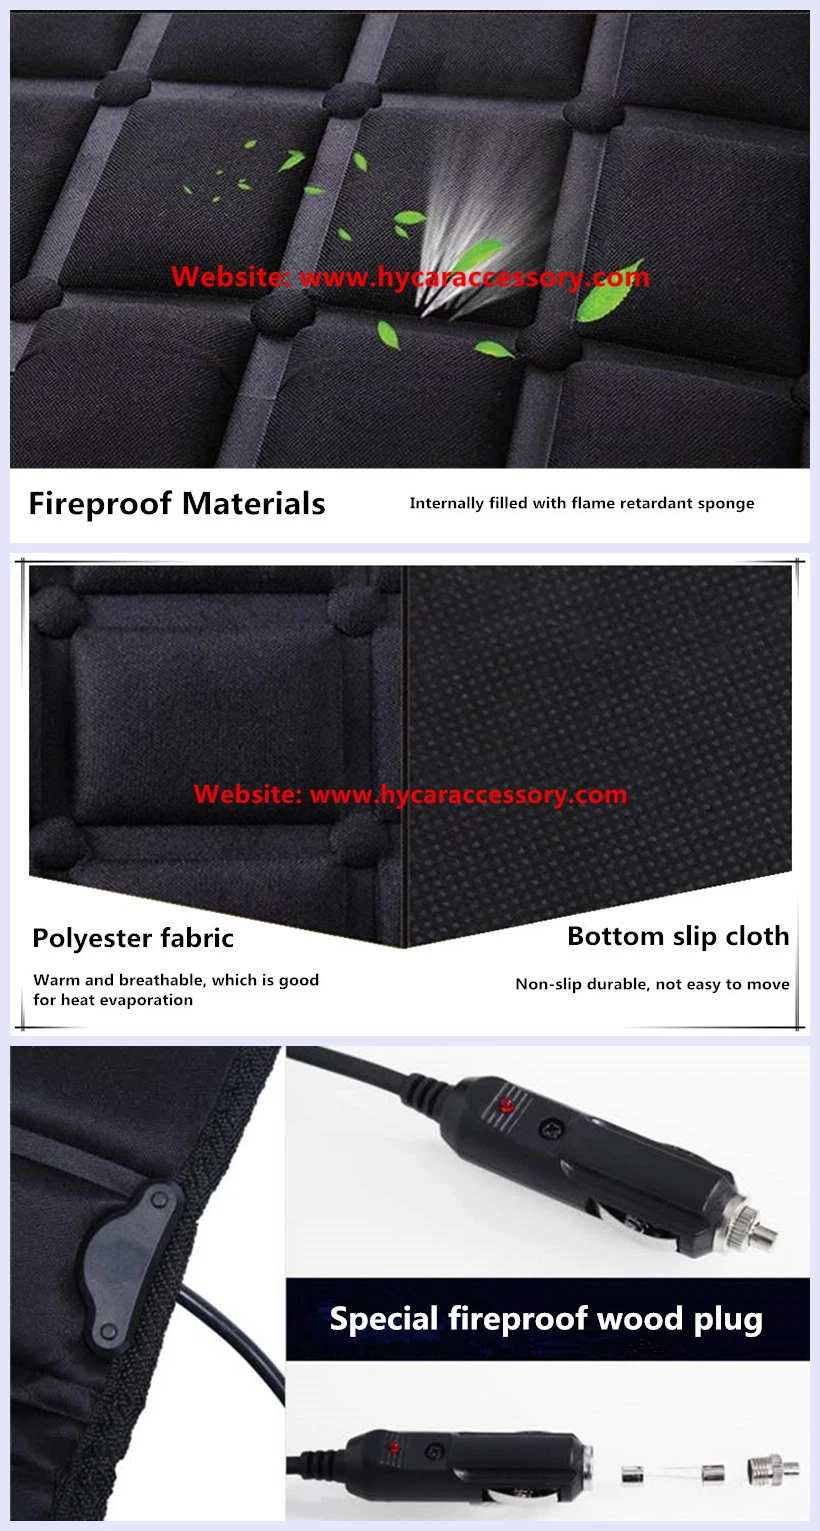 Ce Certification Car Decoration Car Interiorcar Accessory Universal 12V Black Heating Mat for Seat of Car